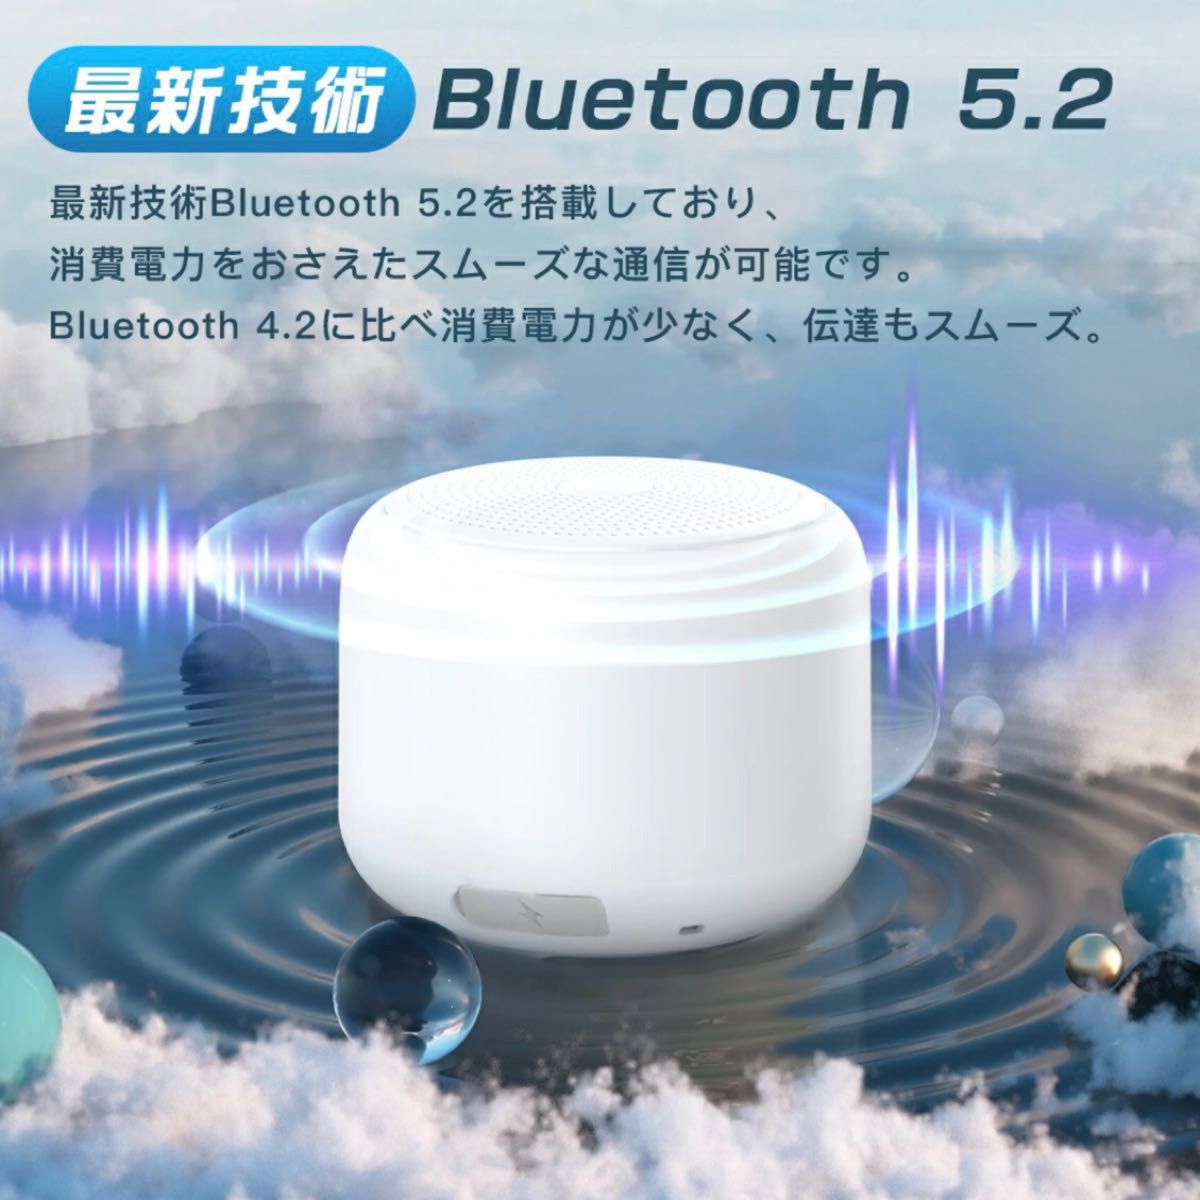 Bluetooth スピーカー ポータブル 防水 通話 小型 白 ホワイト iPhone Android コンパクト 持ち運び 